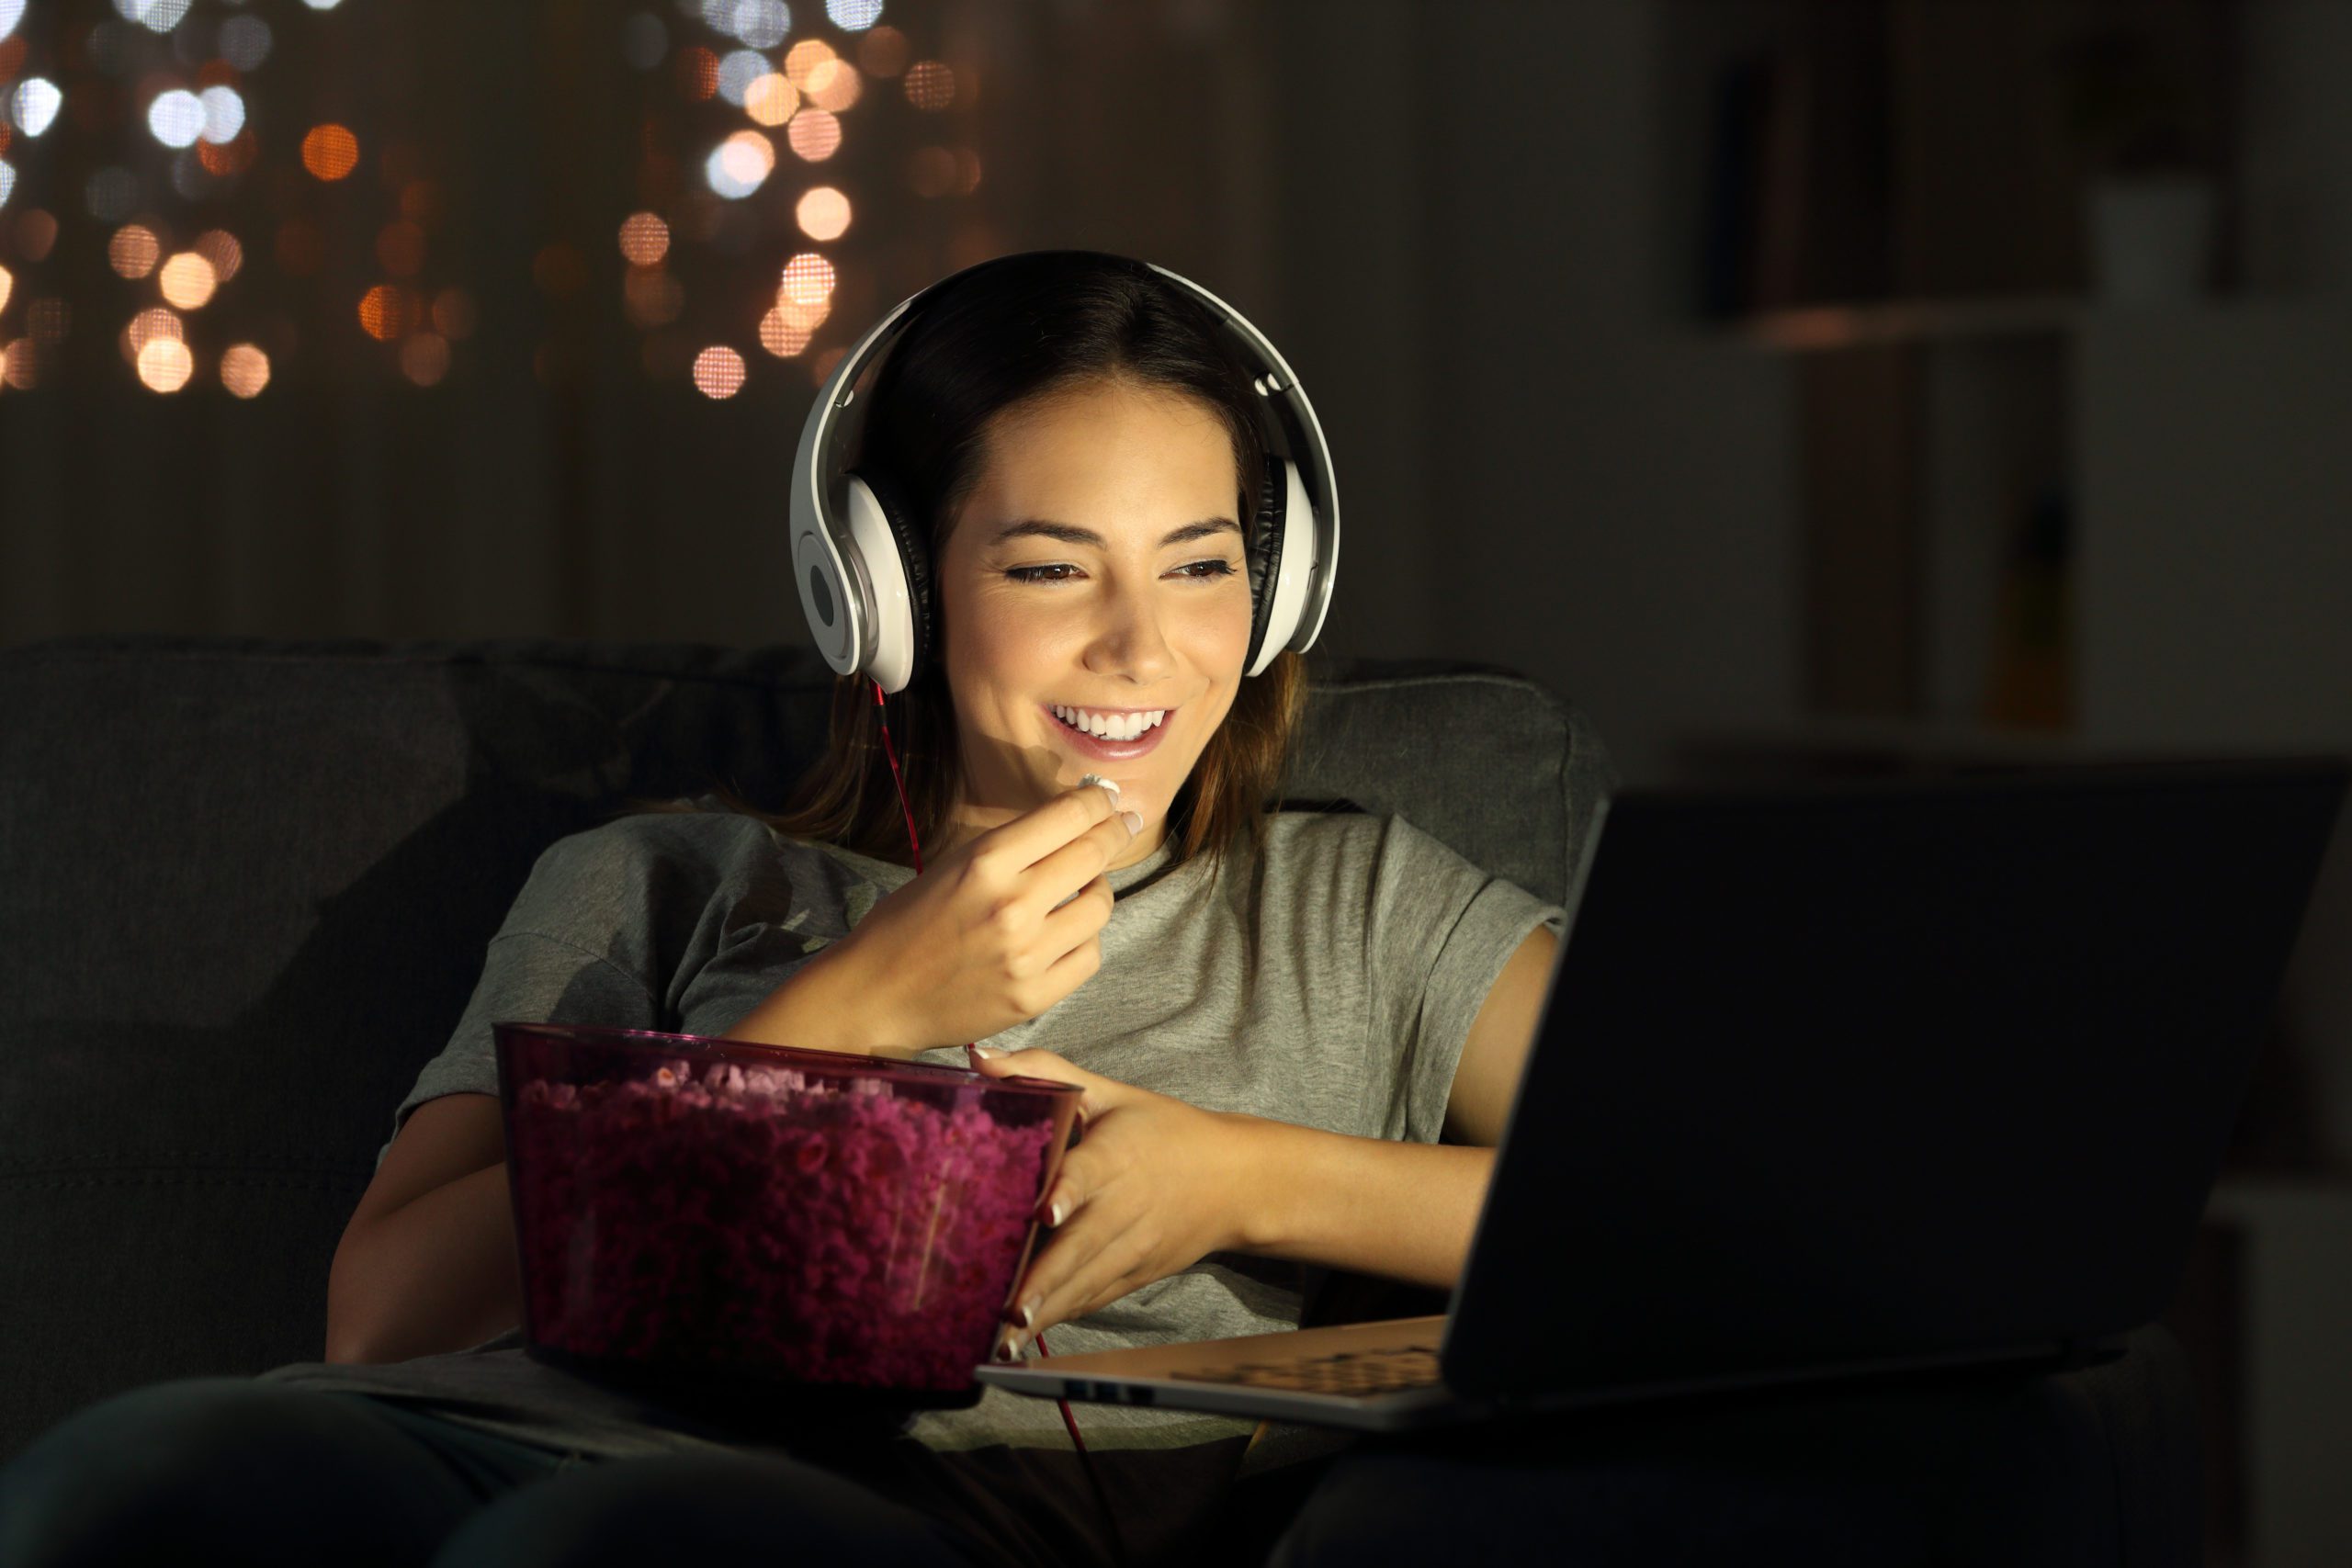 Woman watching a video and eating popcorn on the couch with headphones on